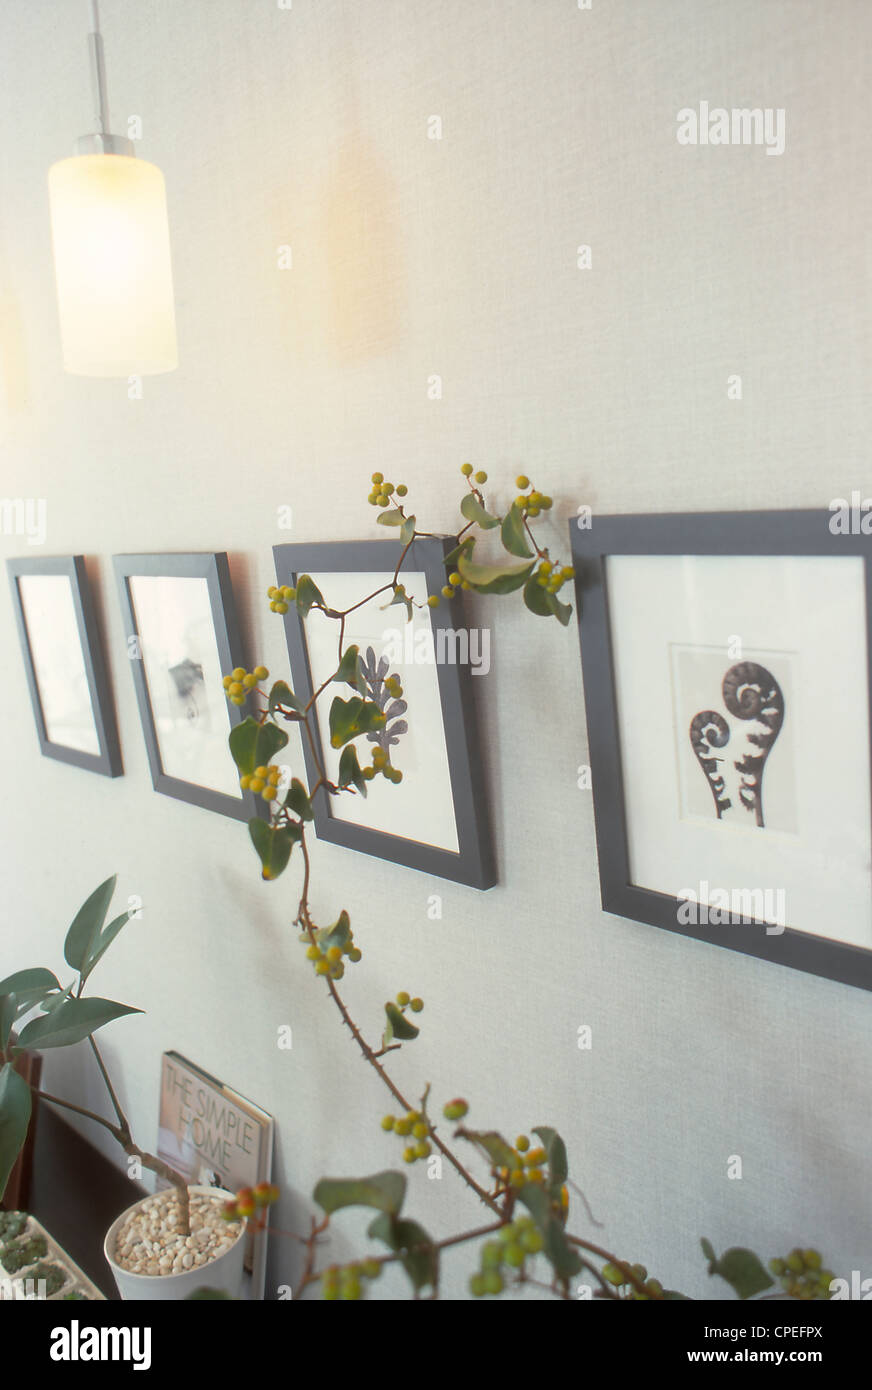 Plant And Picture Frames With Illuminated Lamp Stock Photo